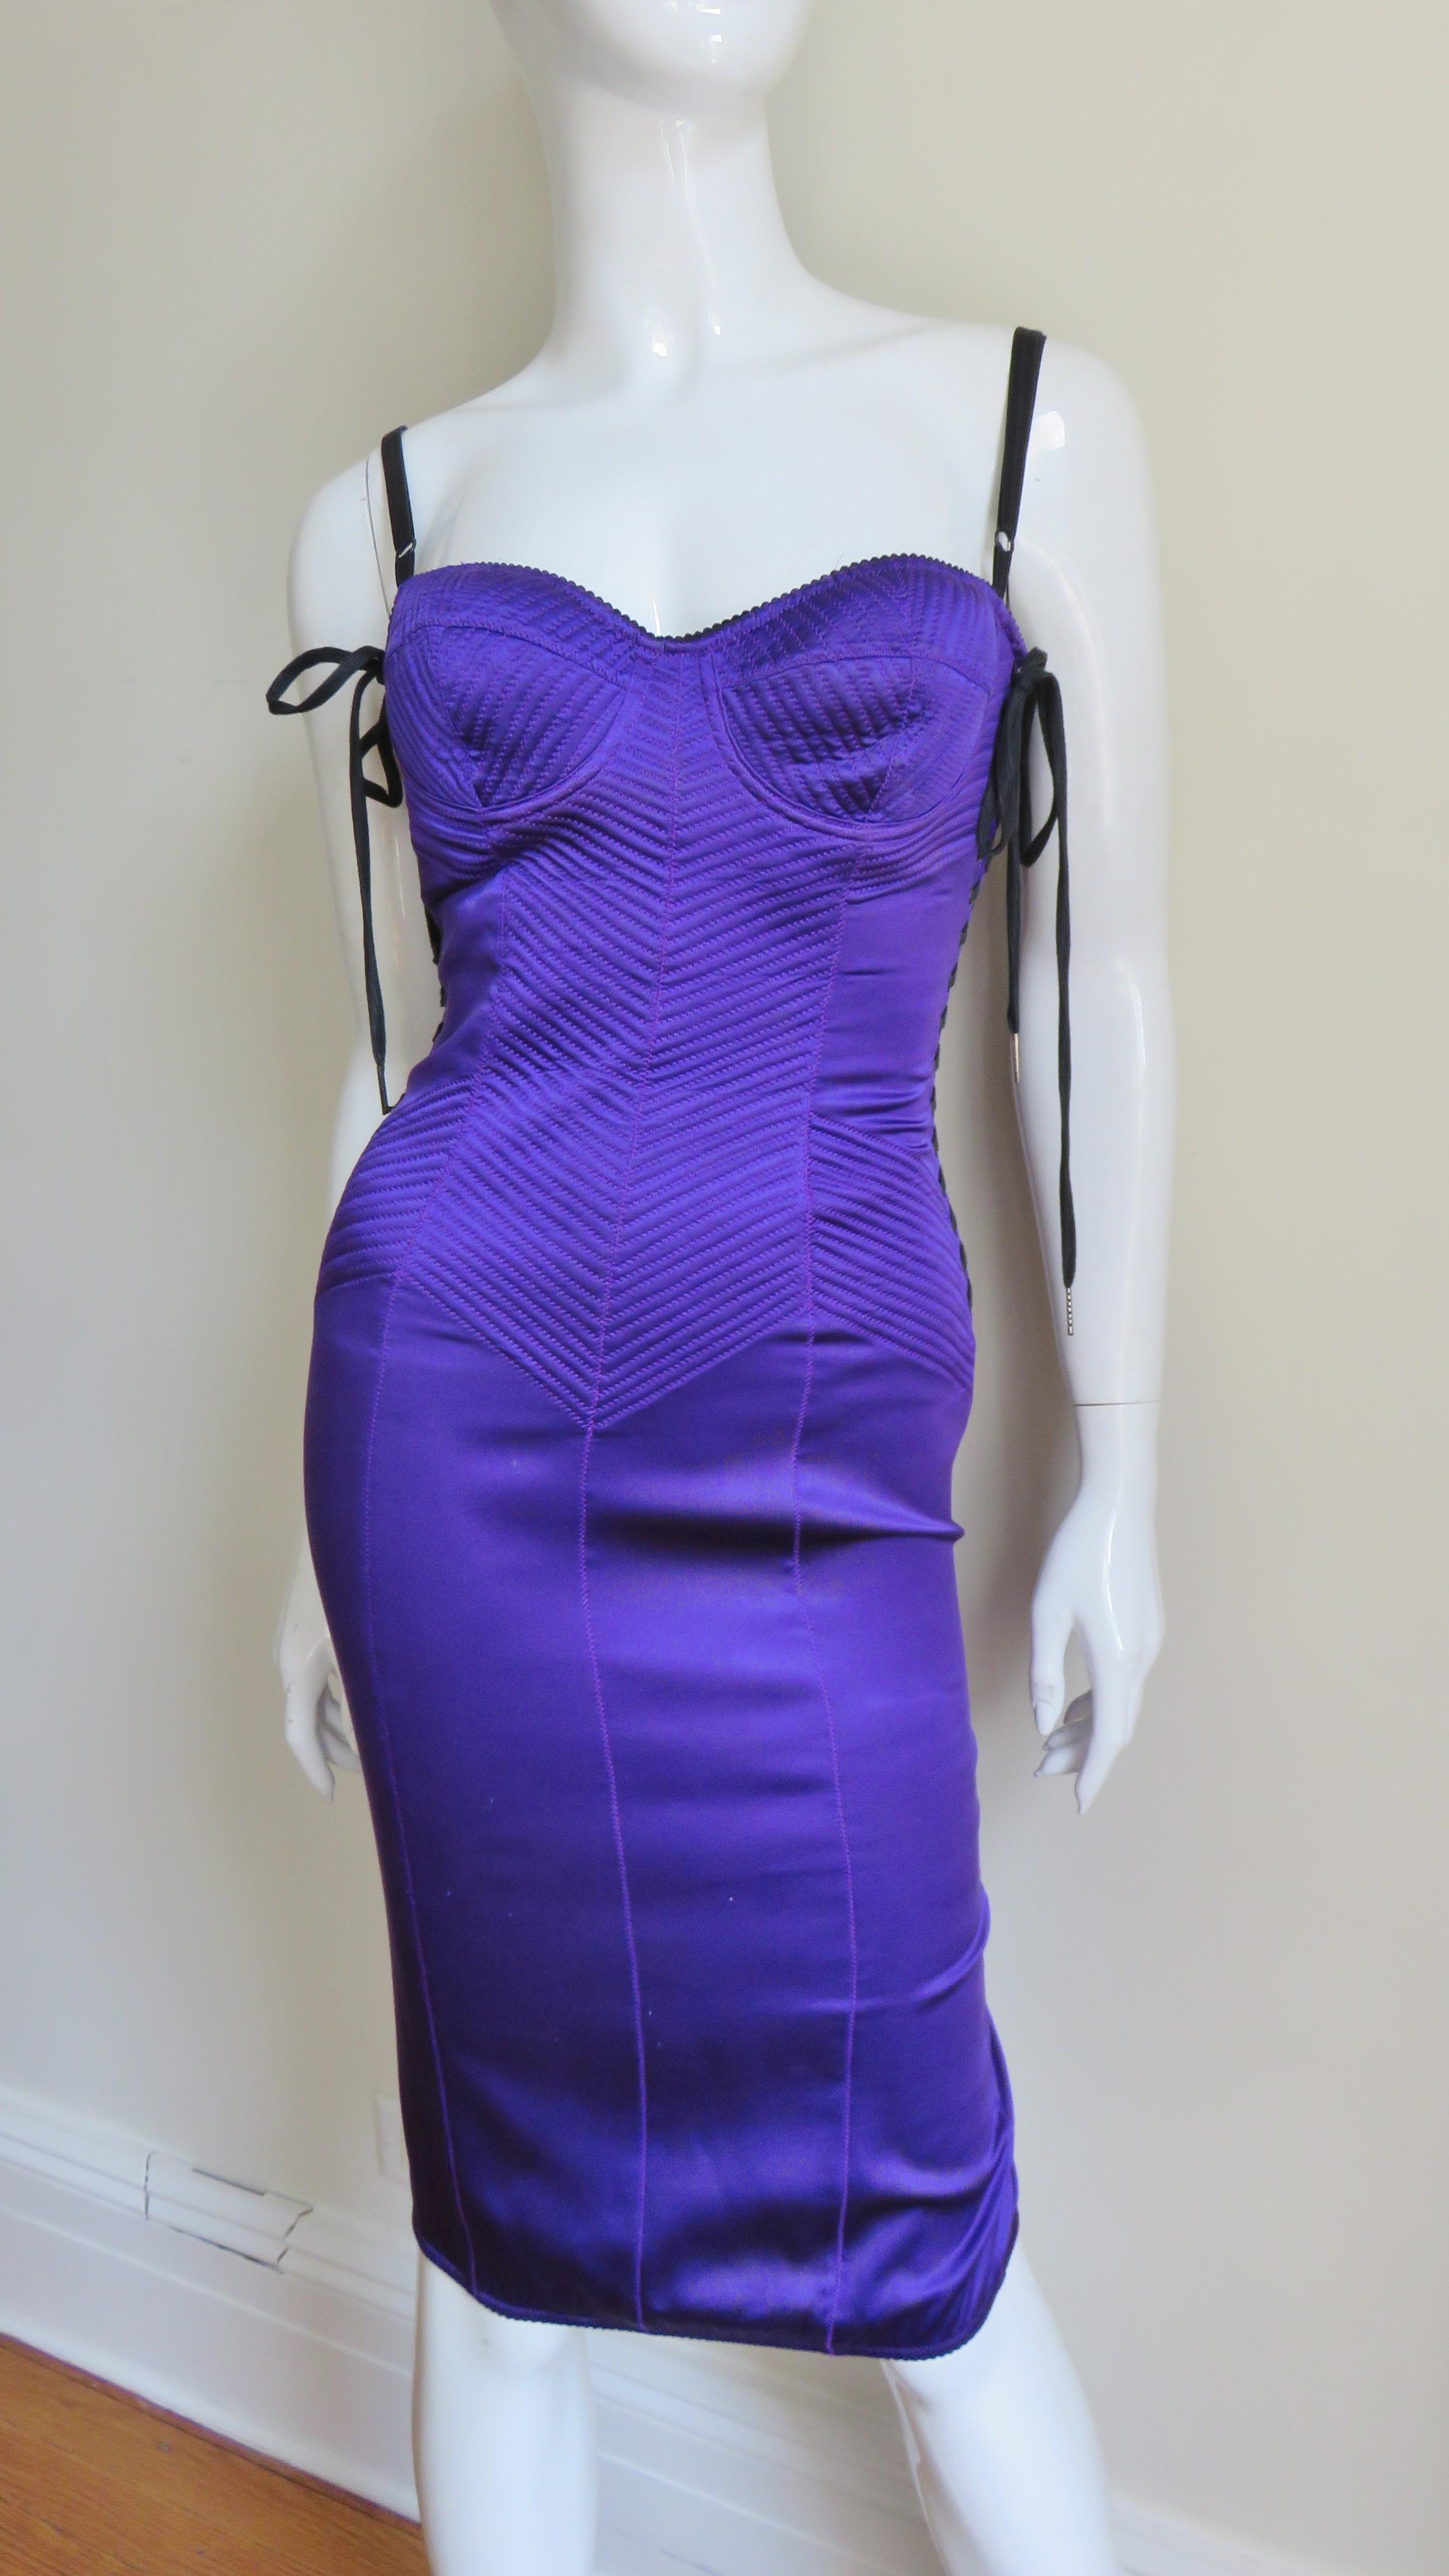 A beautiful purple stretch silk dress from Dolce & Gabbana.   It has figure enhancing rows of stitching at angles throughout the torso. The sides have functional lacing from underarms down through the hips.  The under wire bodice is top stitched and